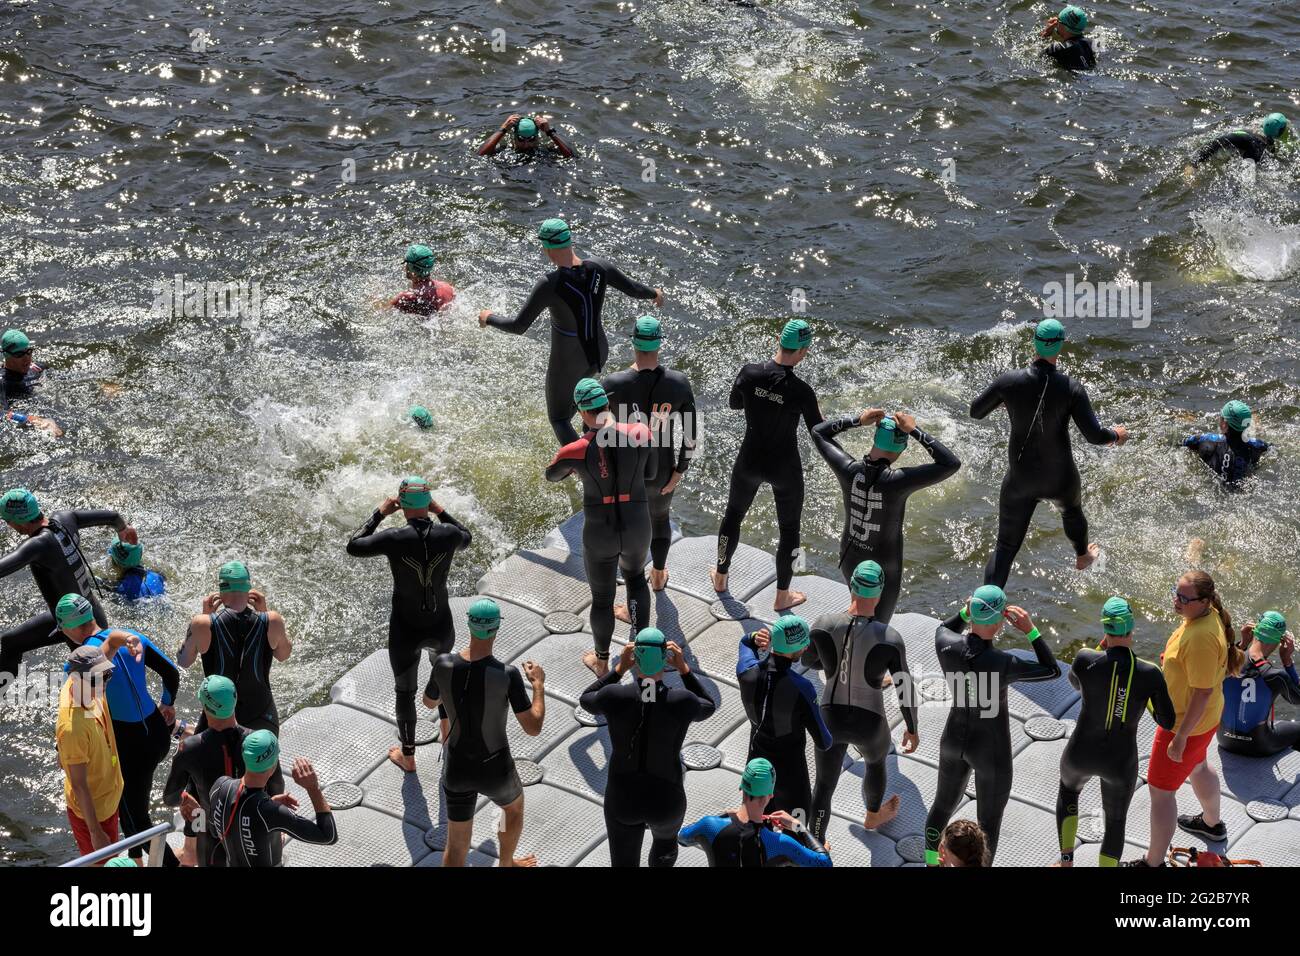 Male triathletes jump in the water for the swim competition at the AJ Bell London Triathlon 2018, UK Stock Photo